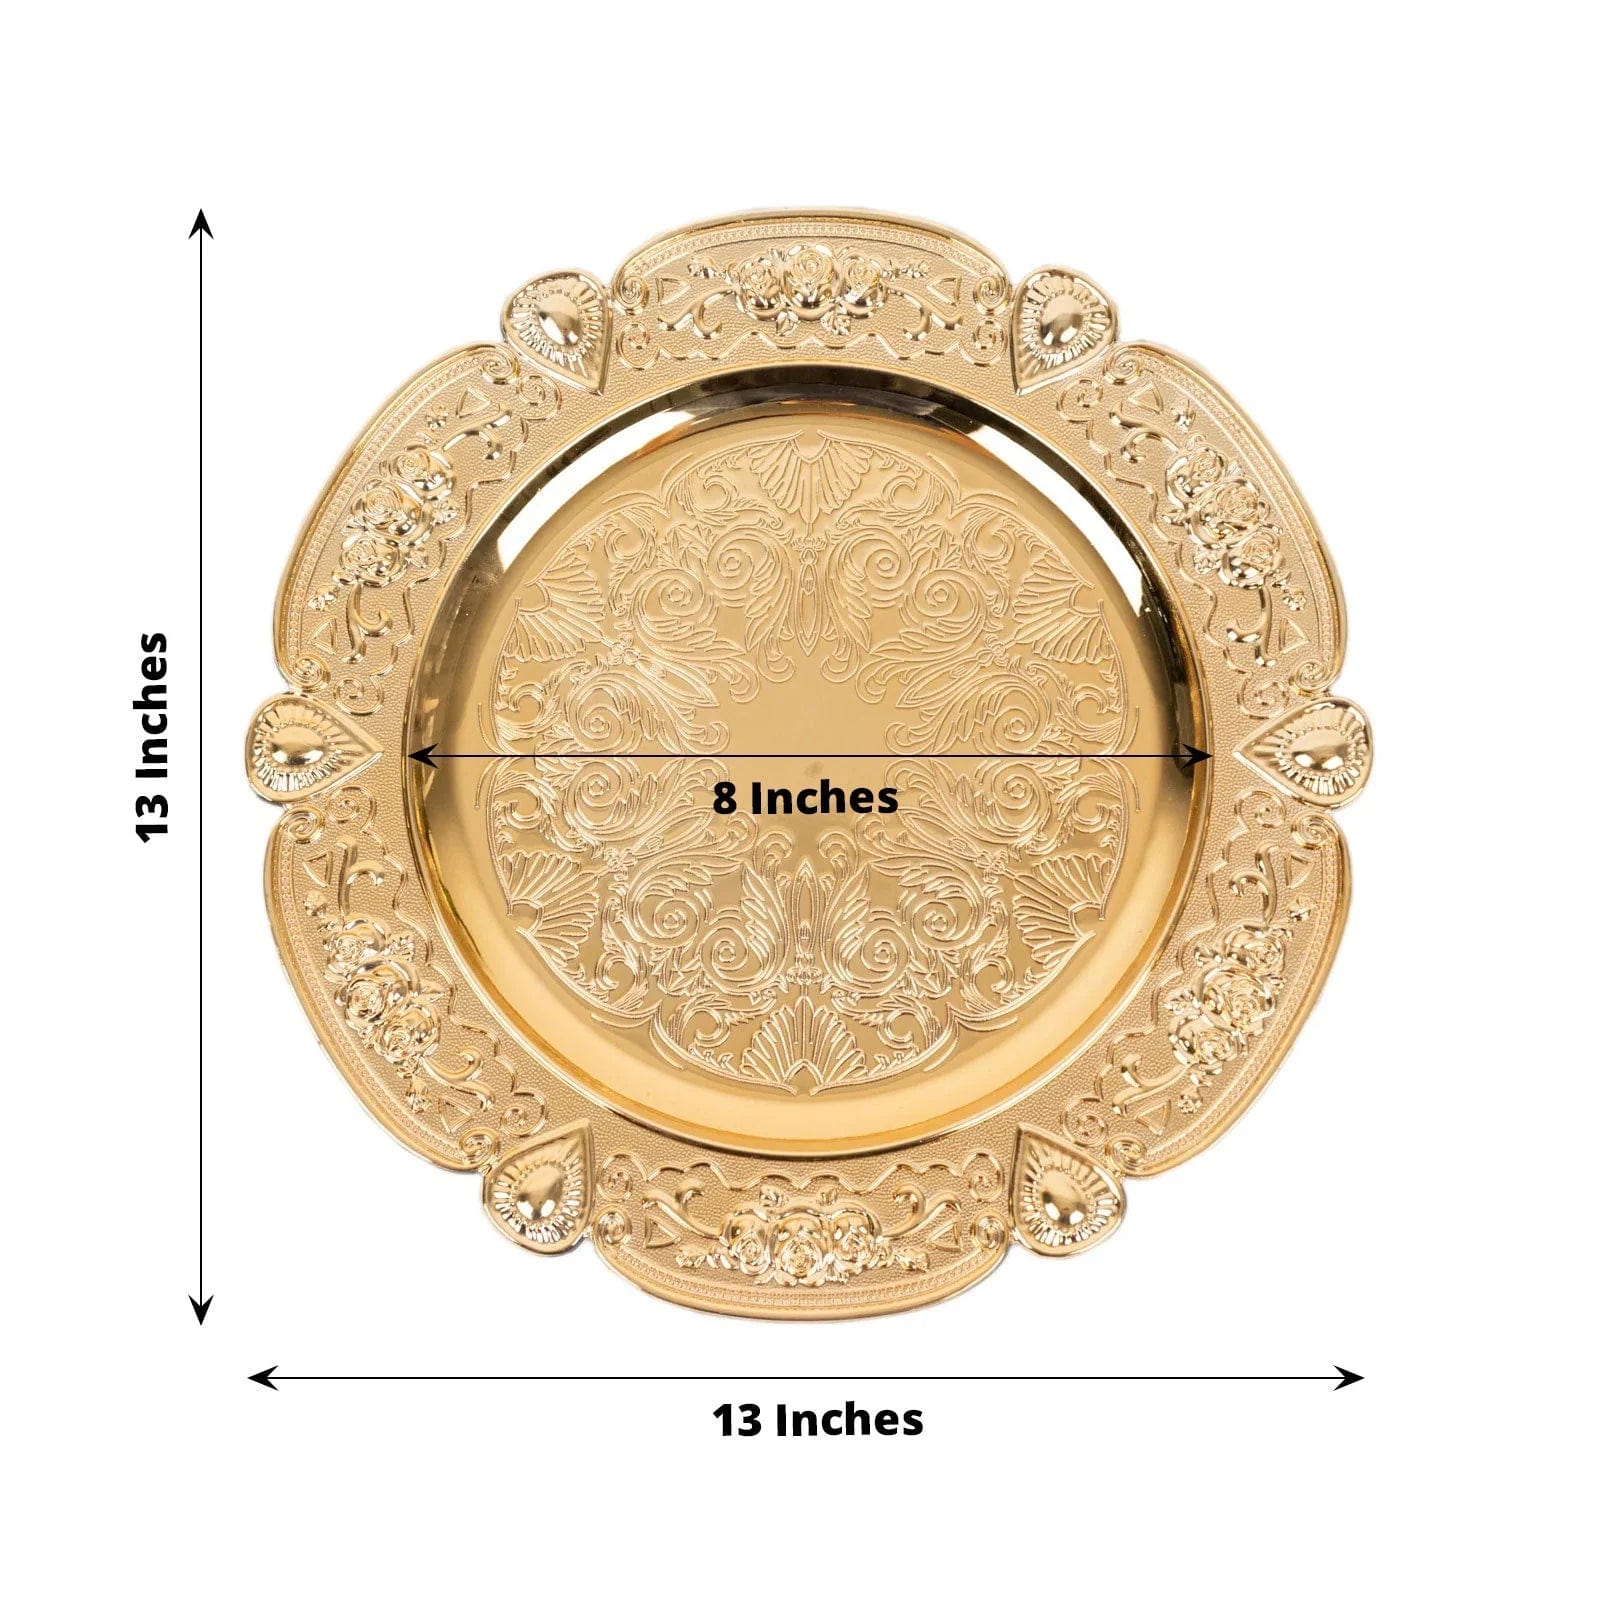 6 Round 13 in Plastic Charger Plates Floral Embossed Design with Scalloped Rim